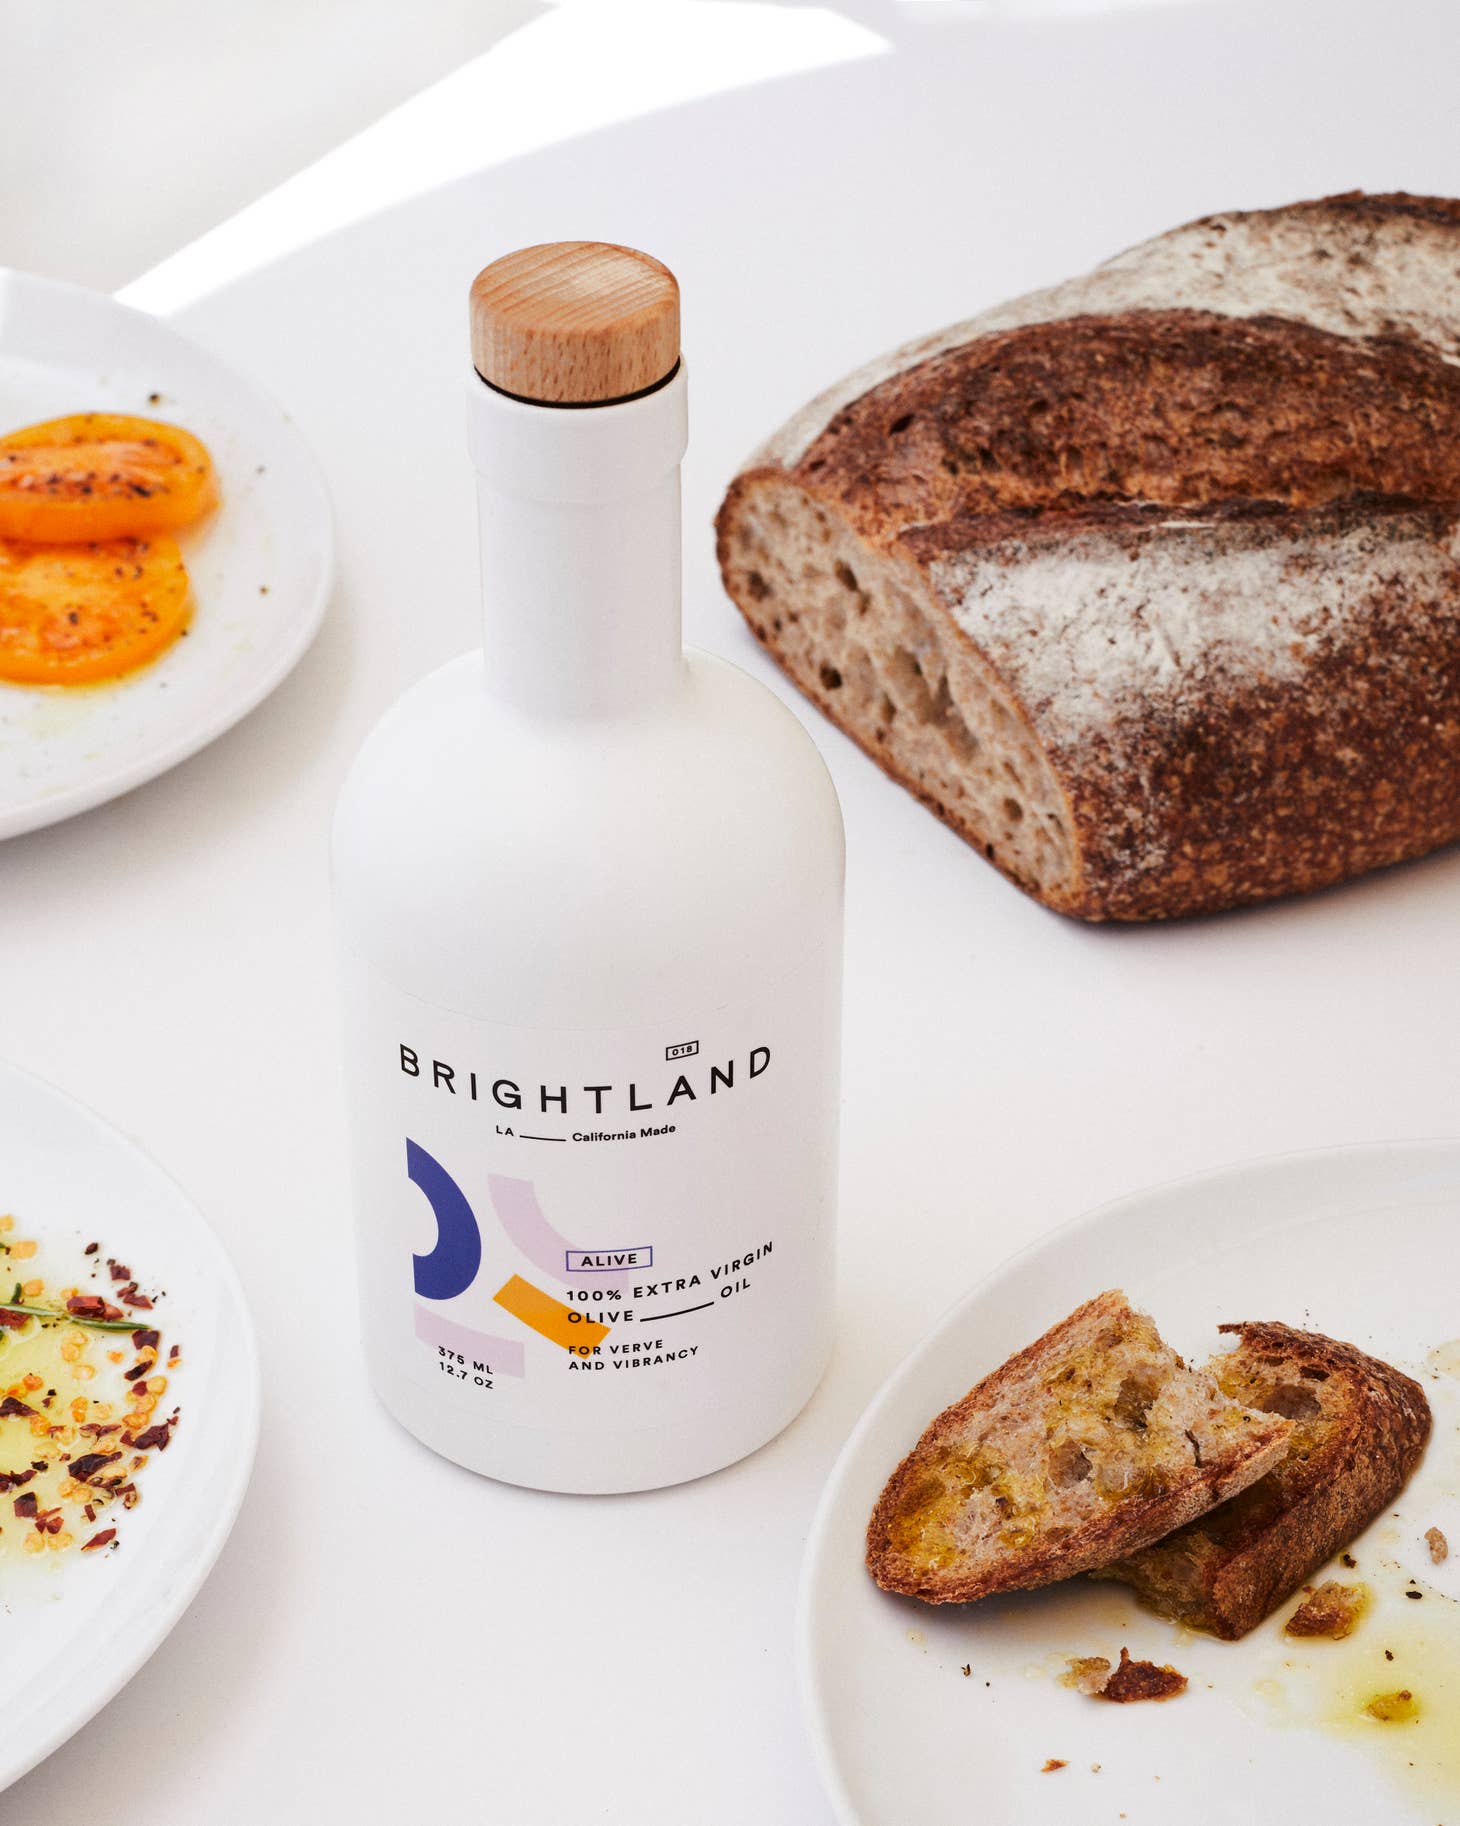 Alive is Brightland's smooth and grassy cold-pressed extra virgin olive oil ideal for salads, hummus, baked goods, fresh greens, and bread. Made with early-harvest arbequina, arbosana, and koroneiki olives grown on small family farms in California’s central valley. 